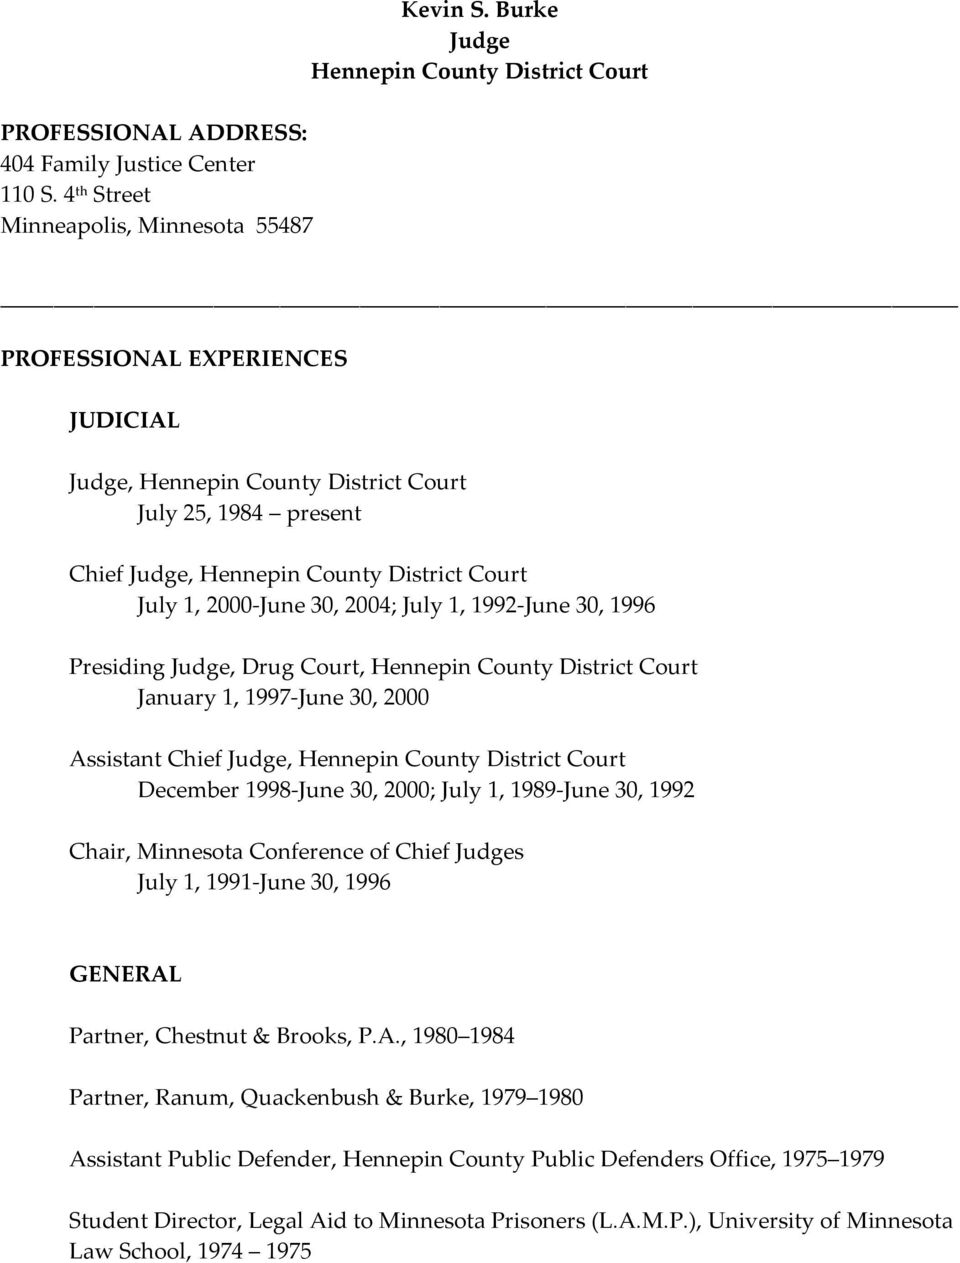 30, 2004; July 1, 1992-June 30, 1996 Presiding Judge, Drug Court, Hennepin County District Court January 1, 1997-June 30, 2000 Assistant Chief Judge, Hennepin County District Court December 1998-June